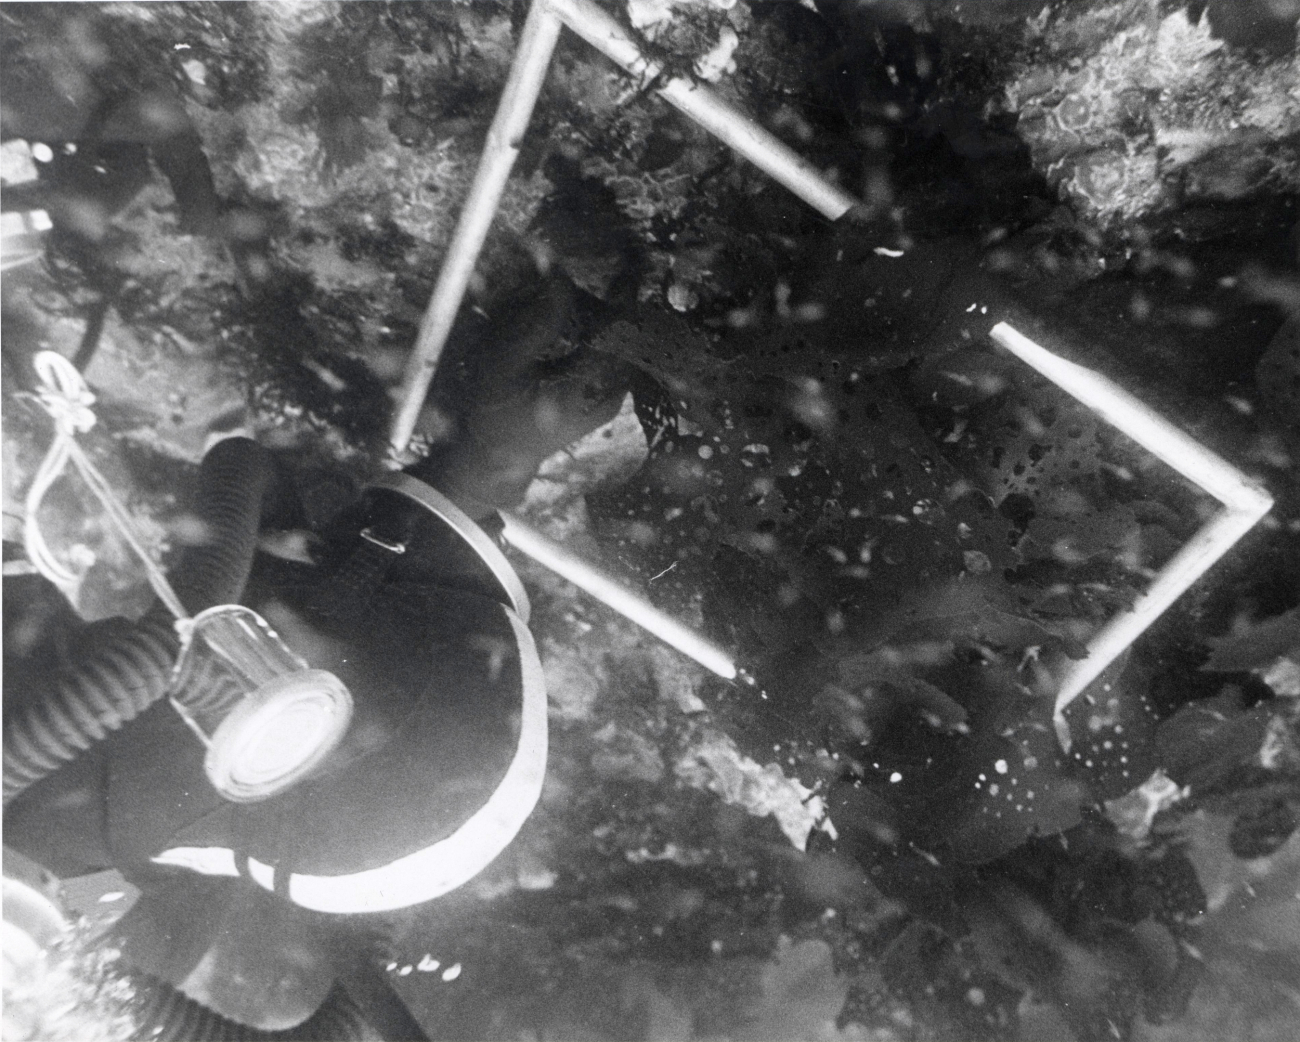 Diver of the BCF Auke Bay Biological Laboratory examining sea plants andanimals inside the perimeter of a study plot